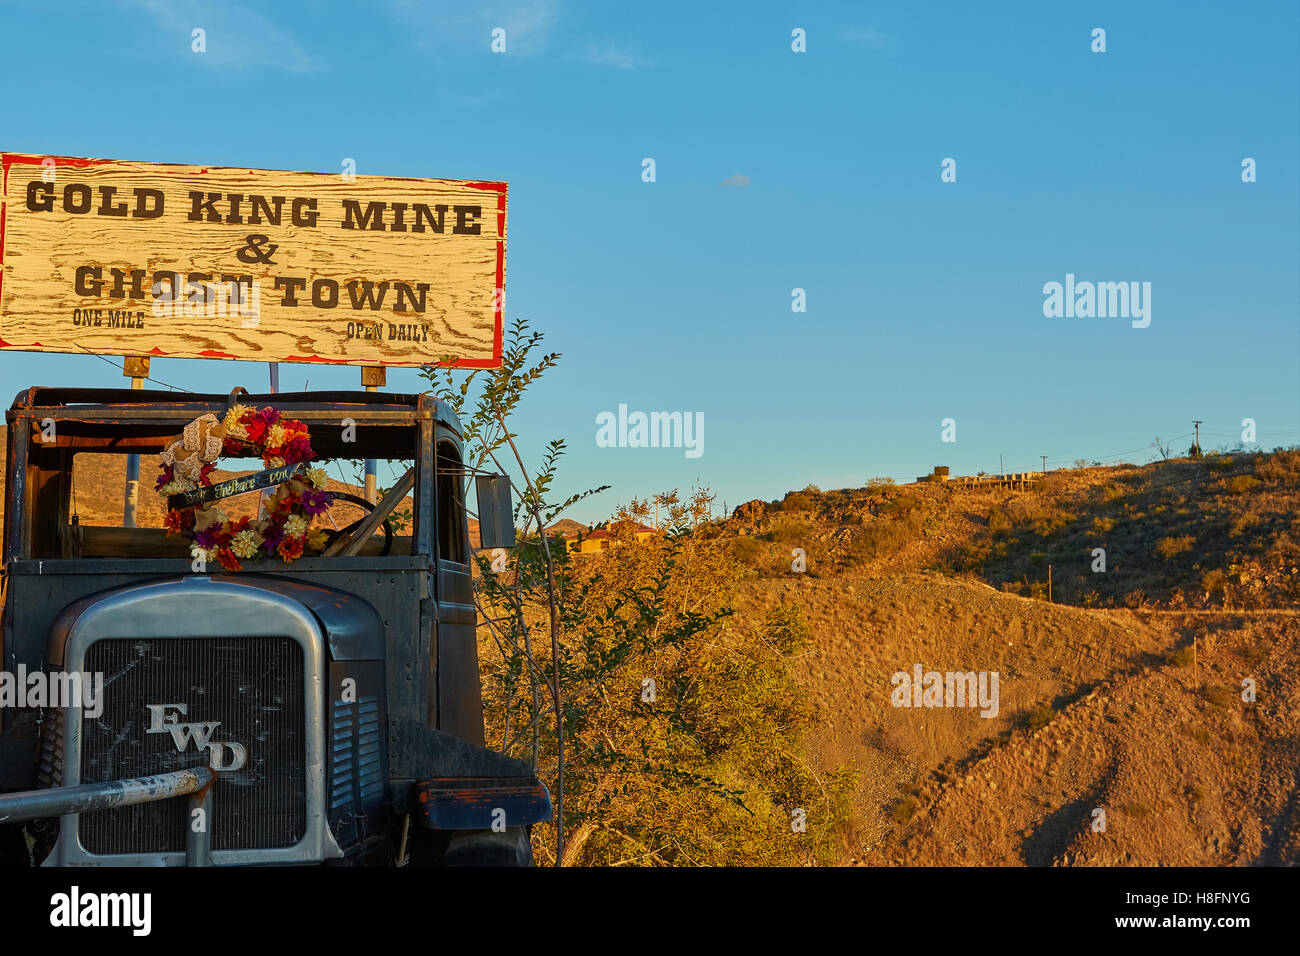 Rustic Billboard And Truck Advertising The Gold King Mine And Ghost Town In Jerome, Arizona. Stock Photo